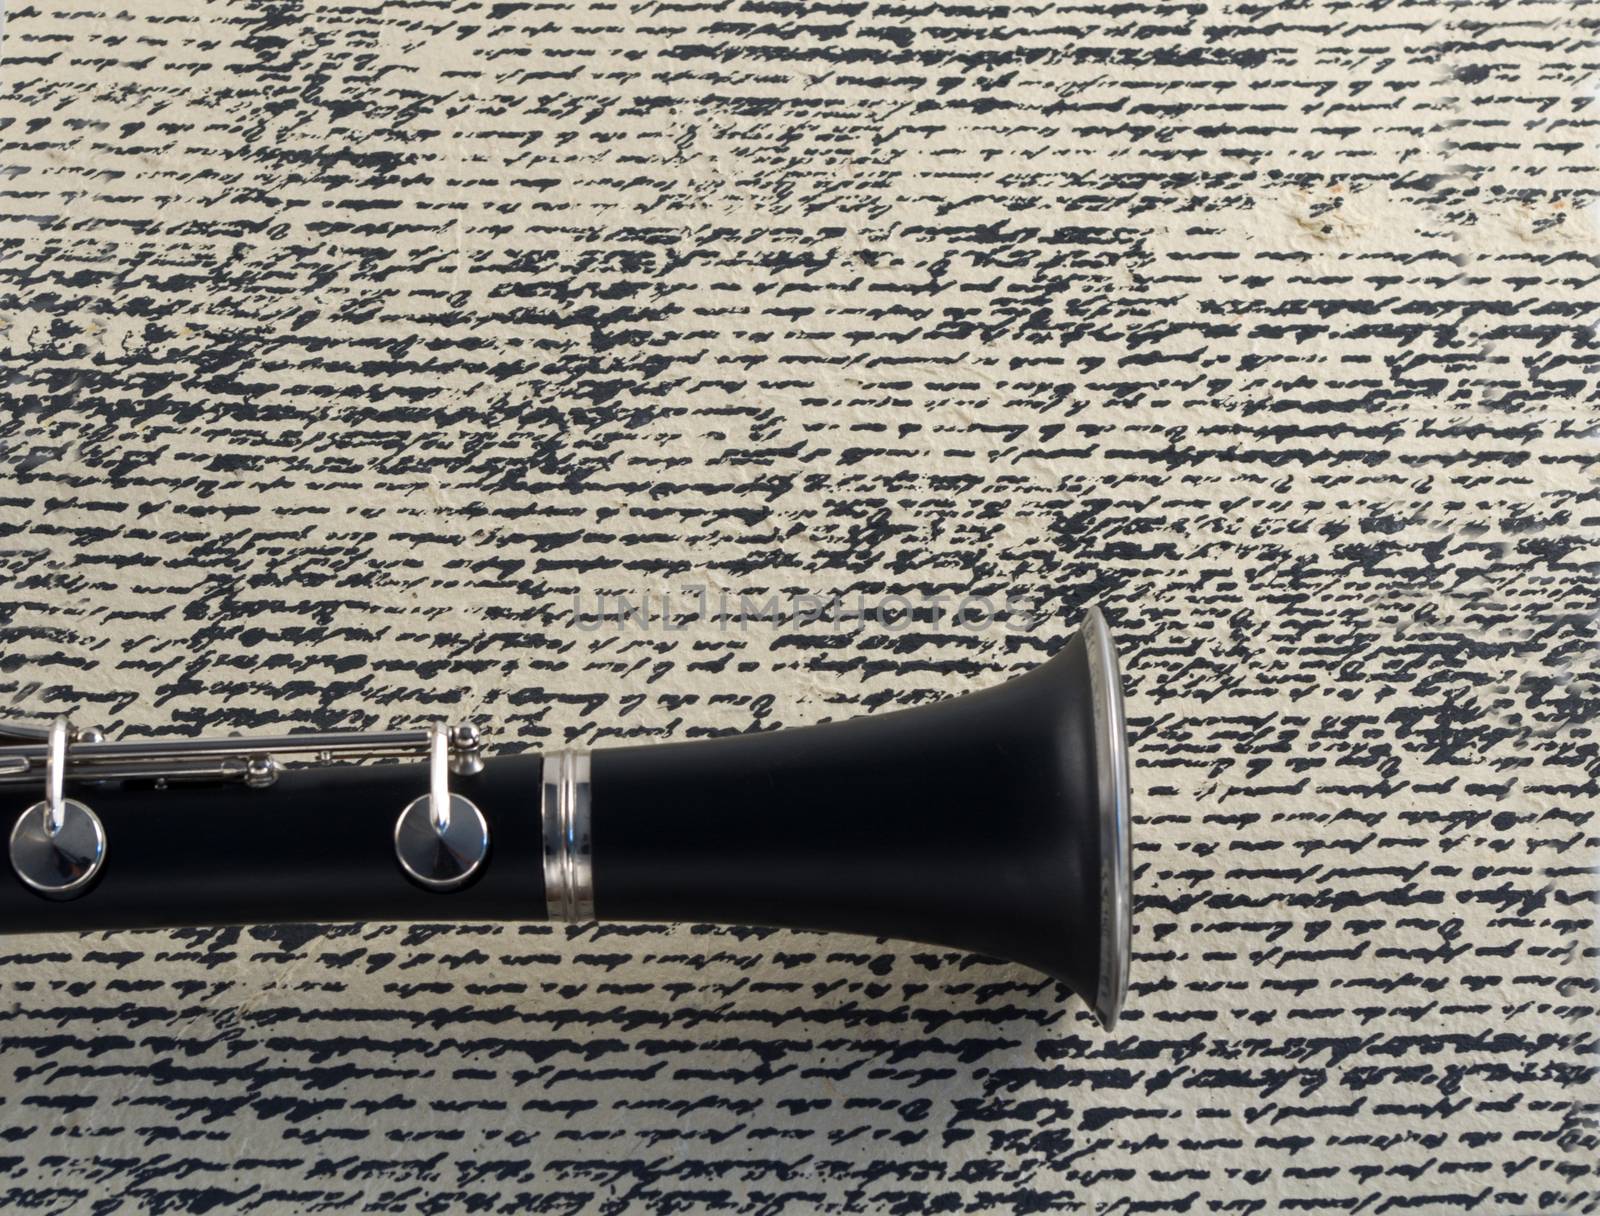 Black Clarinet Bell Close Up by krisblackphotography